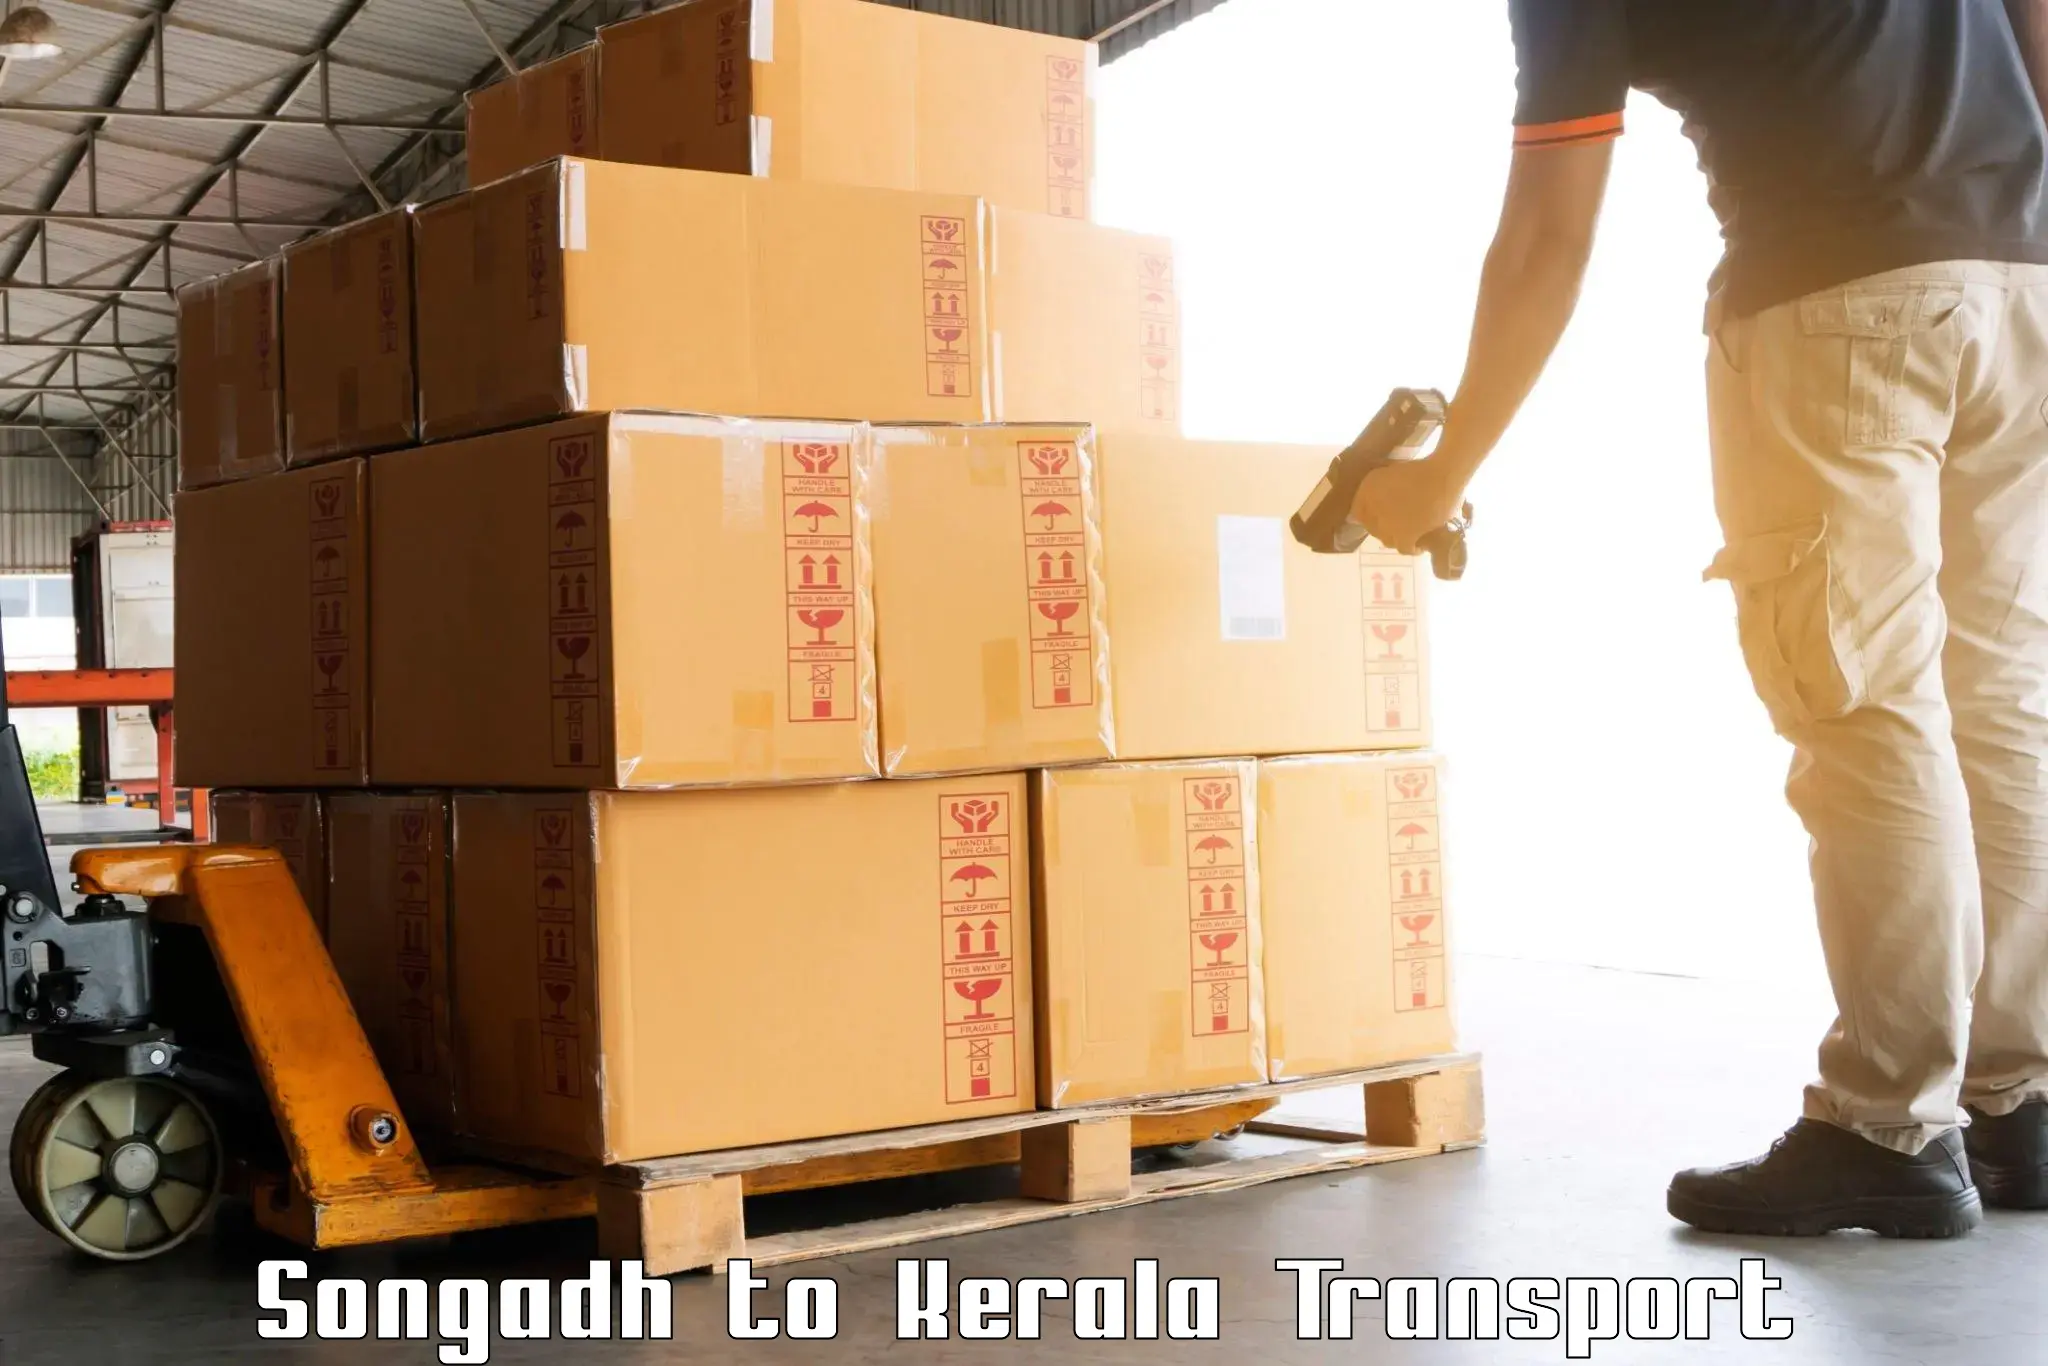 Online transport in Songadh to Nochad